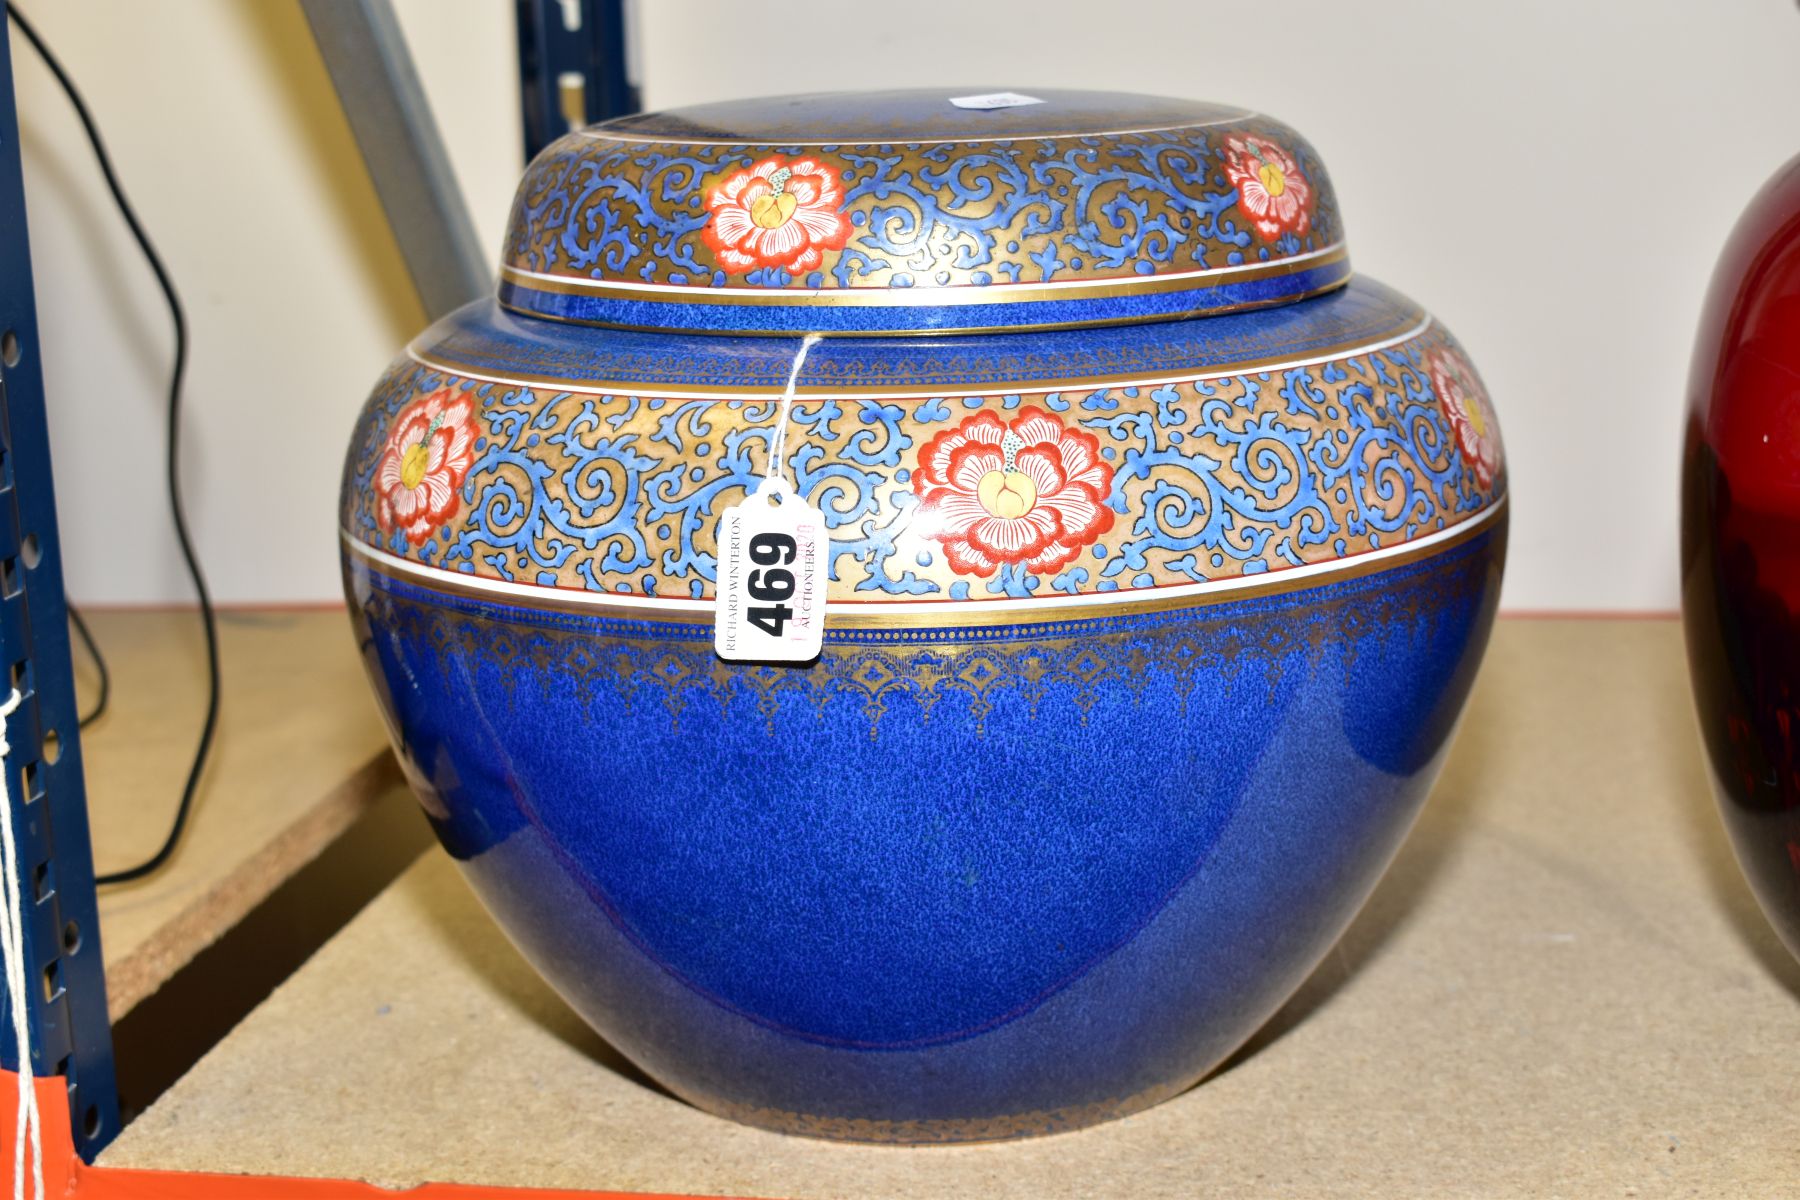 A LARGE WEDGWOOD BLUE WARE GINGER JAR, with a band of enamel scrolling foliage and flowers and - Image 2 of 3